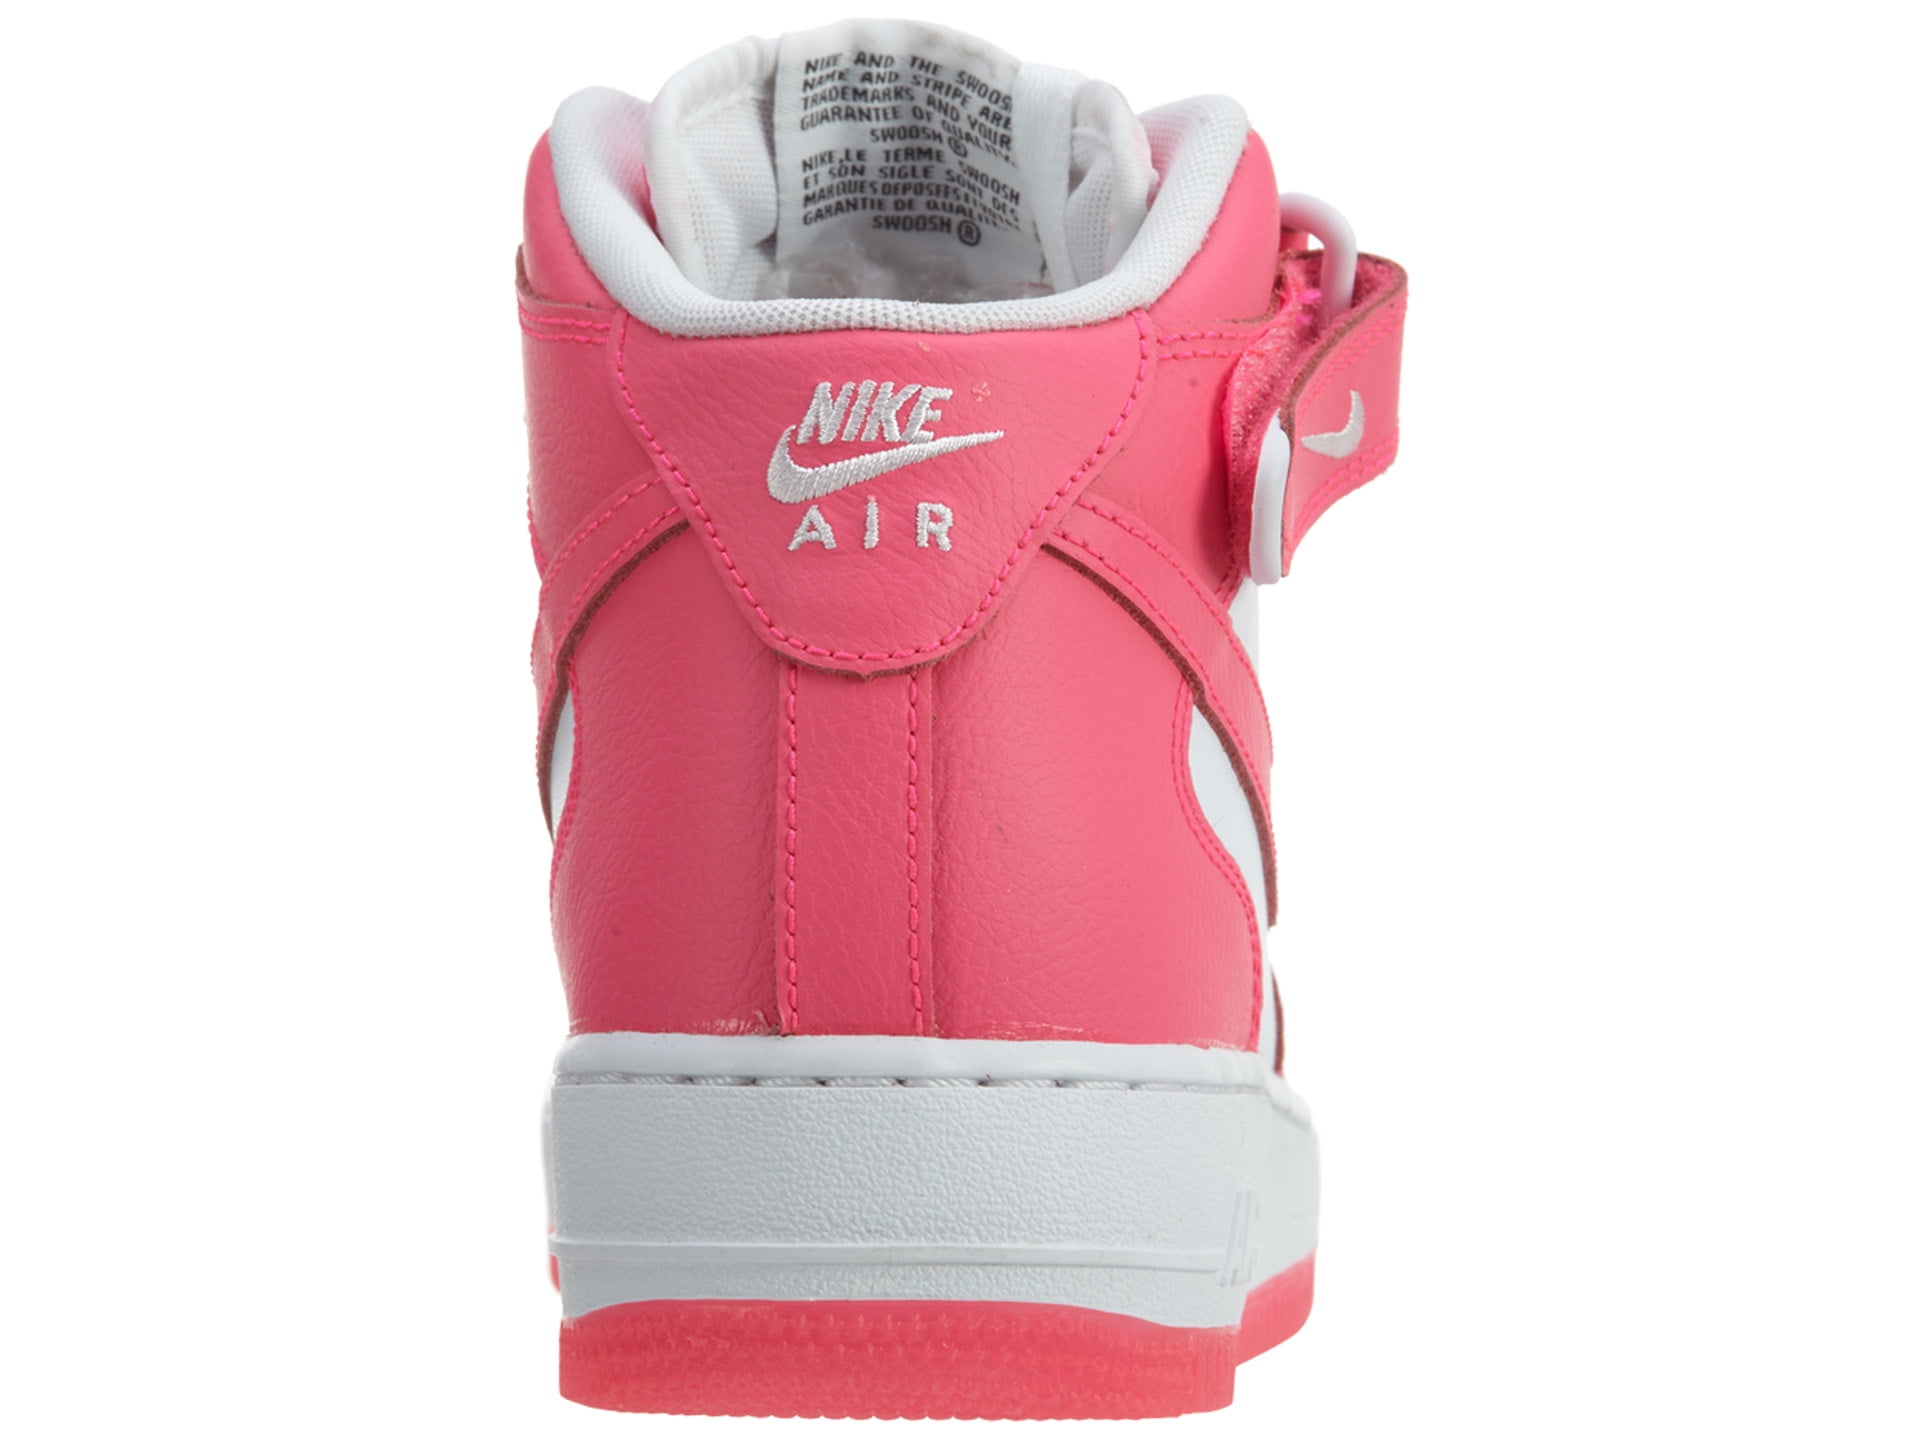 Nike Air Force 1 Mid Level 8 (GS) Kid's Fashion Shoe 820342 600 Size 6Y